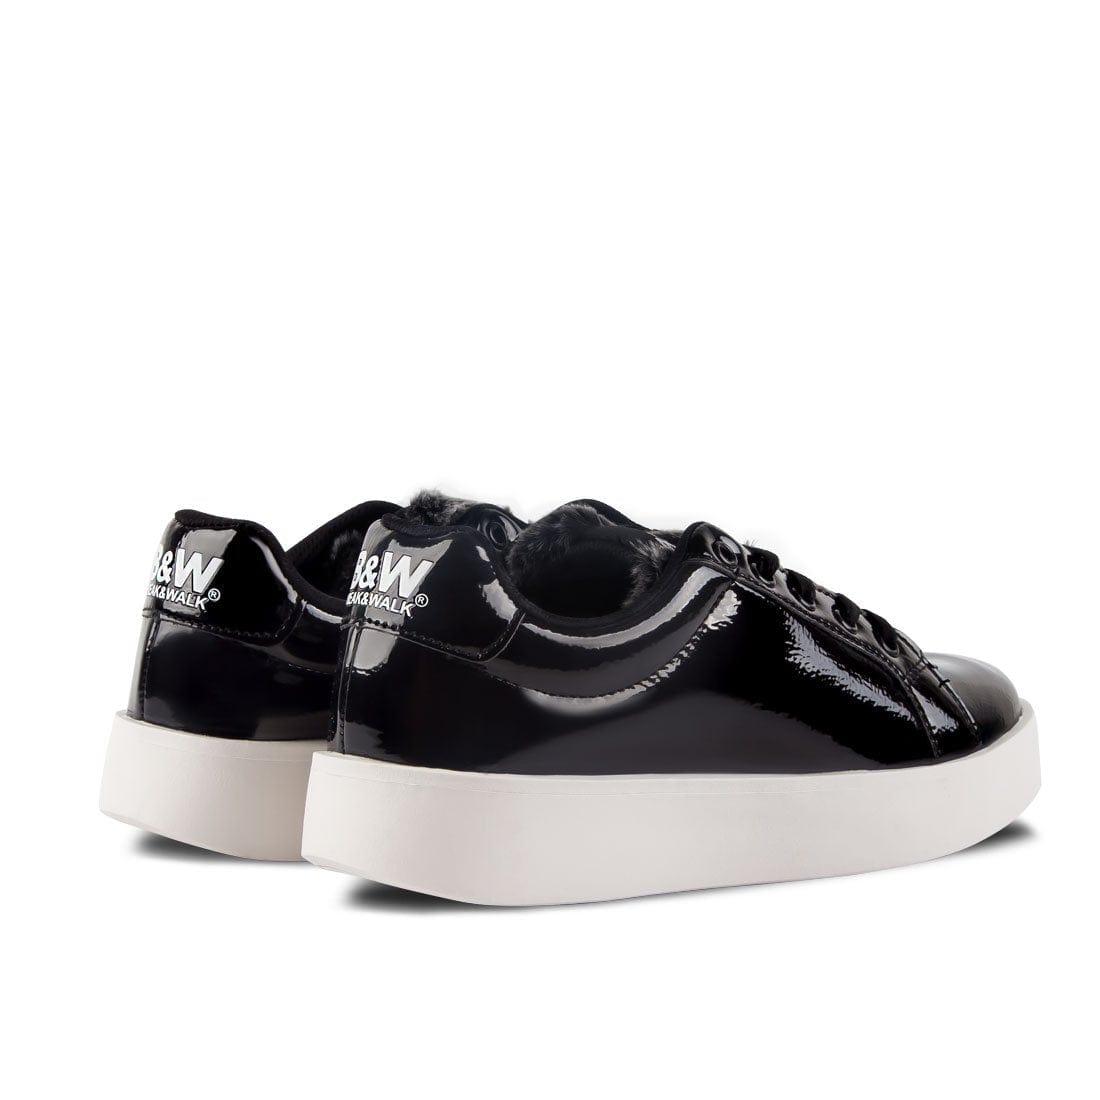 Sneakers Damsel Patent Leather Black